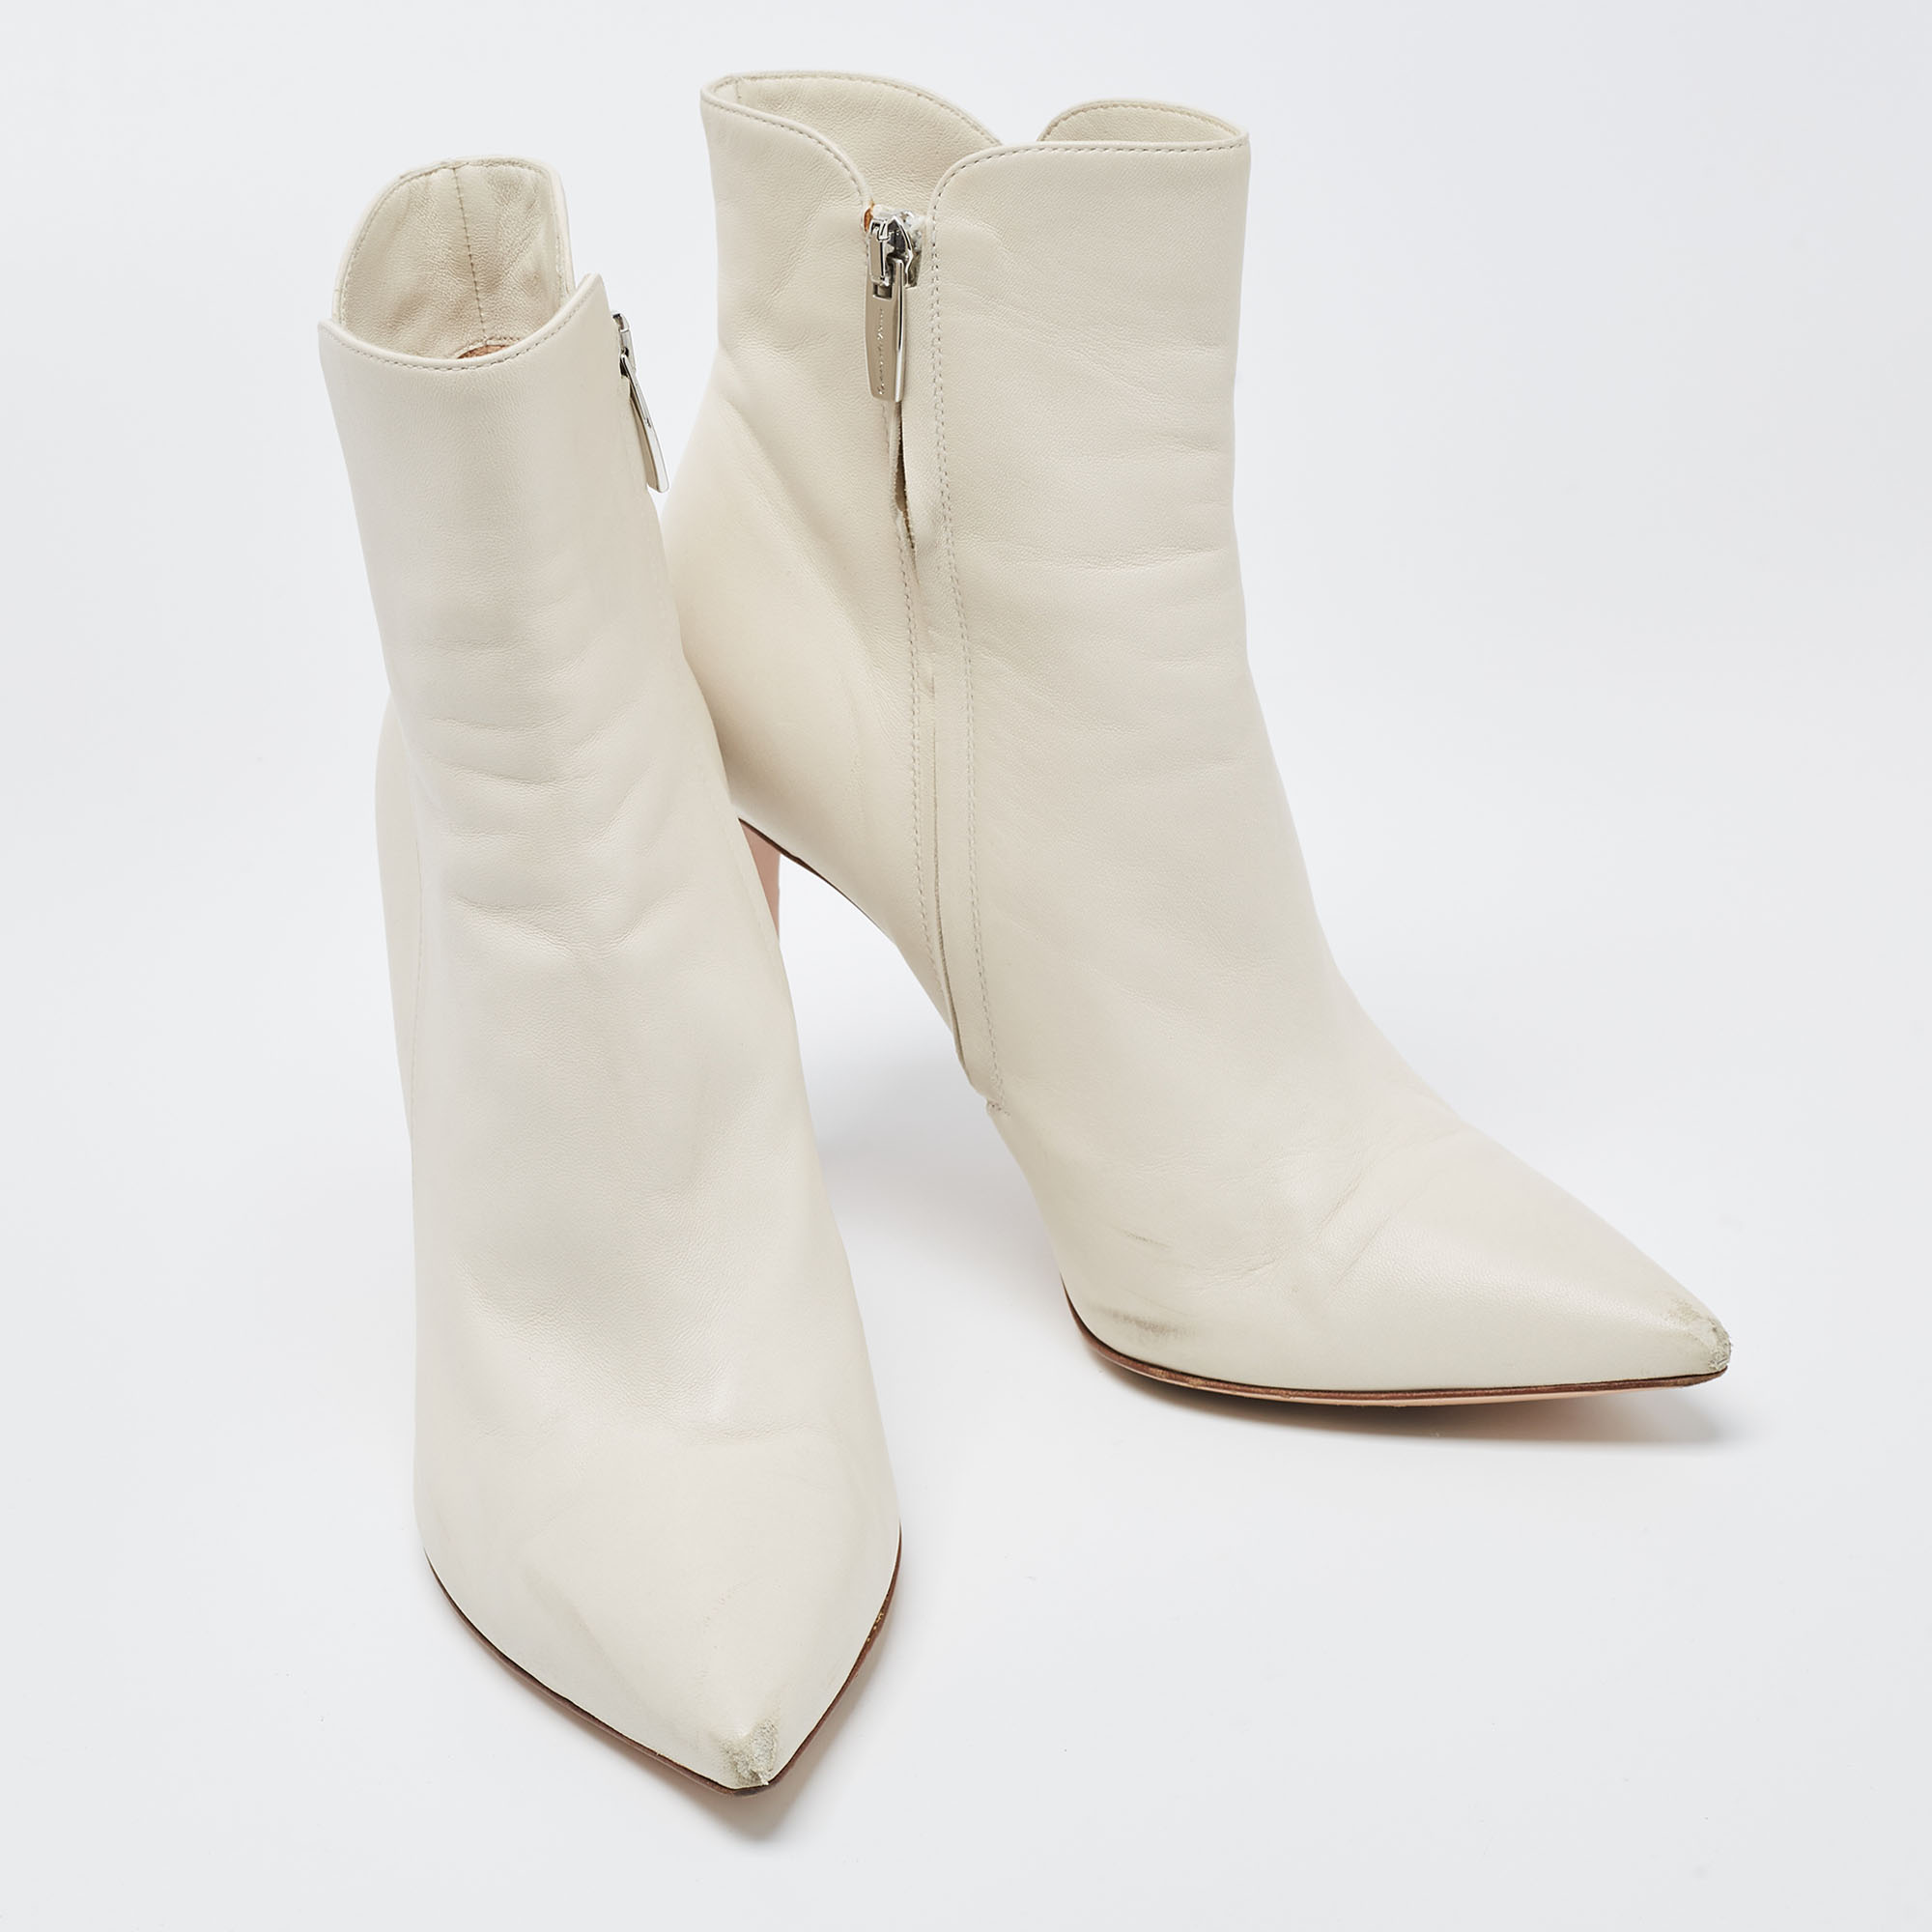 Gianvito Rossi Off White Leather Ankle Boots Size 38